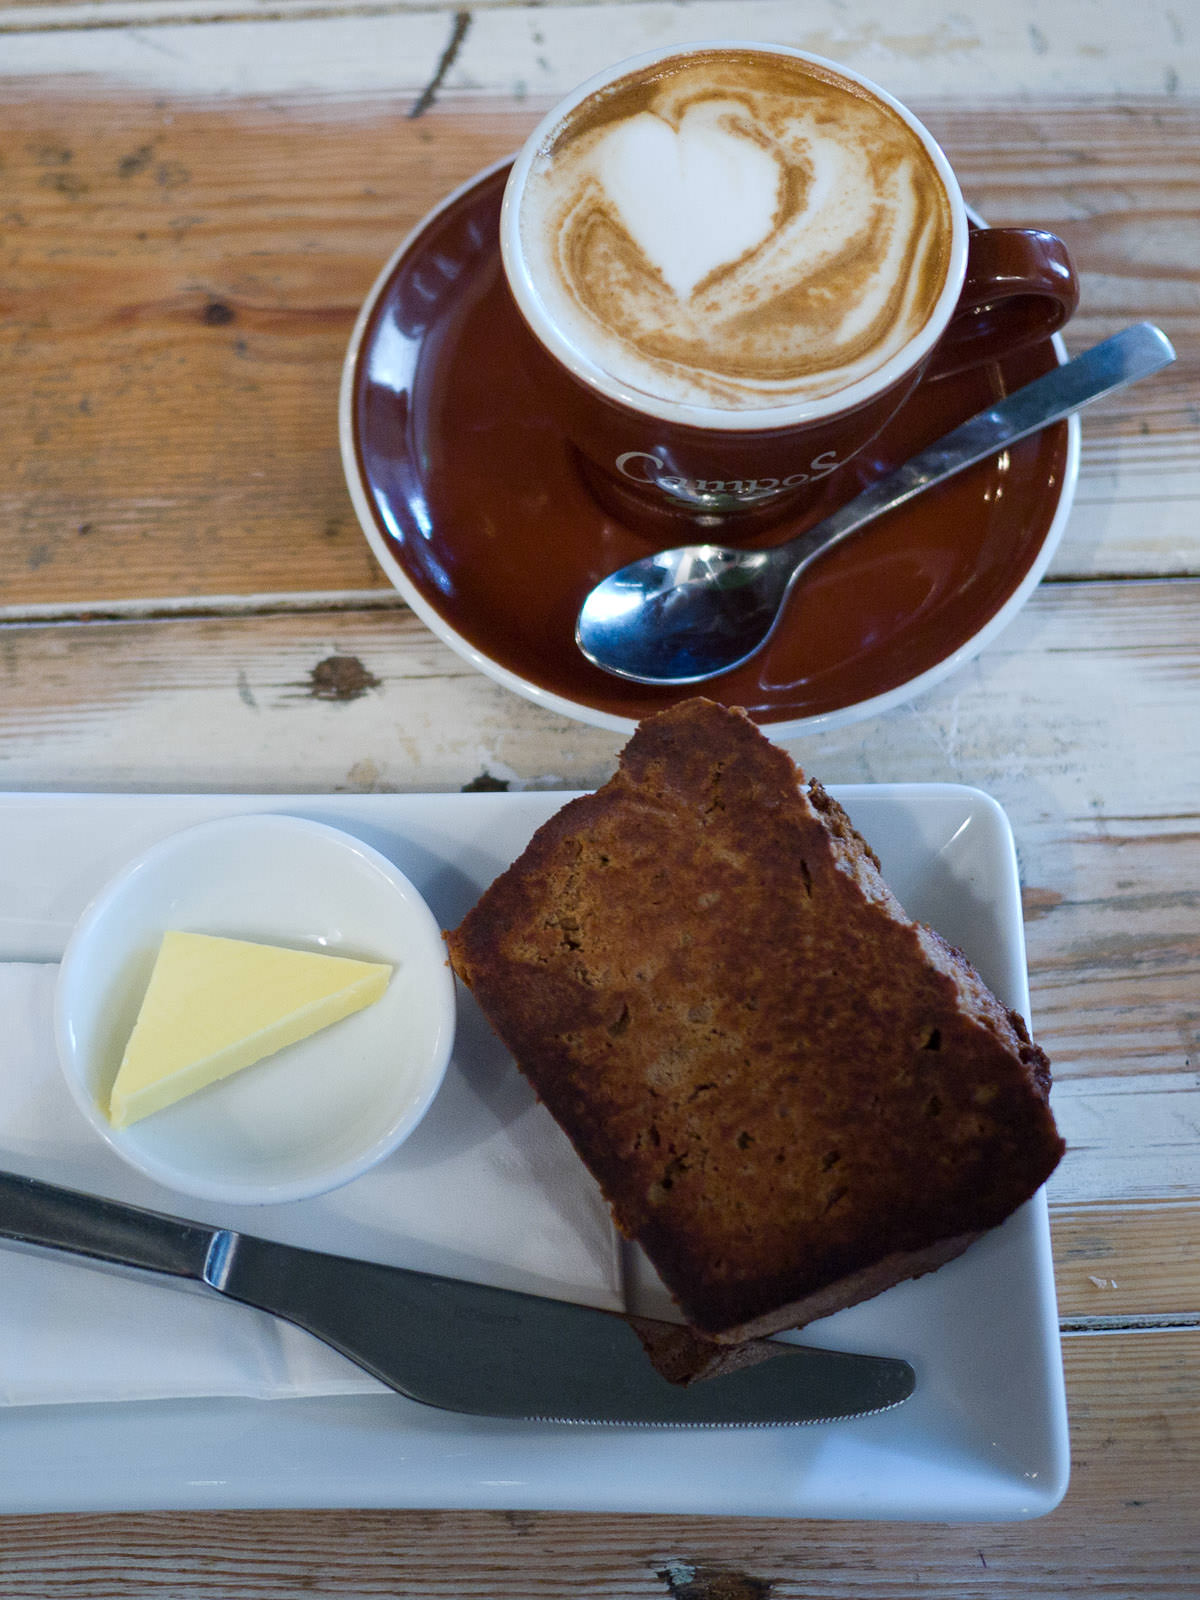 Banana bread with butter and my second soy flat white